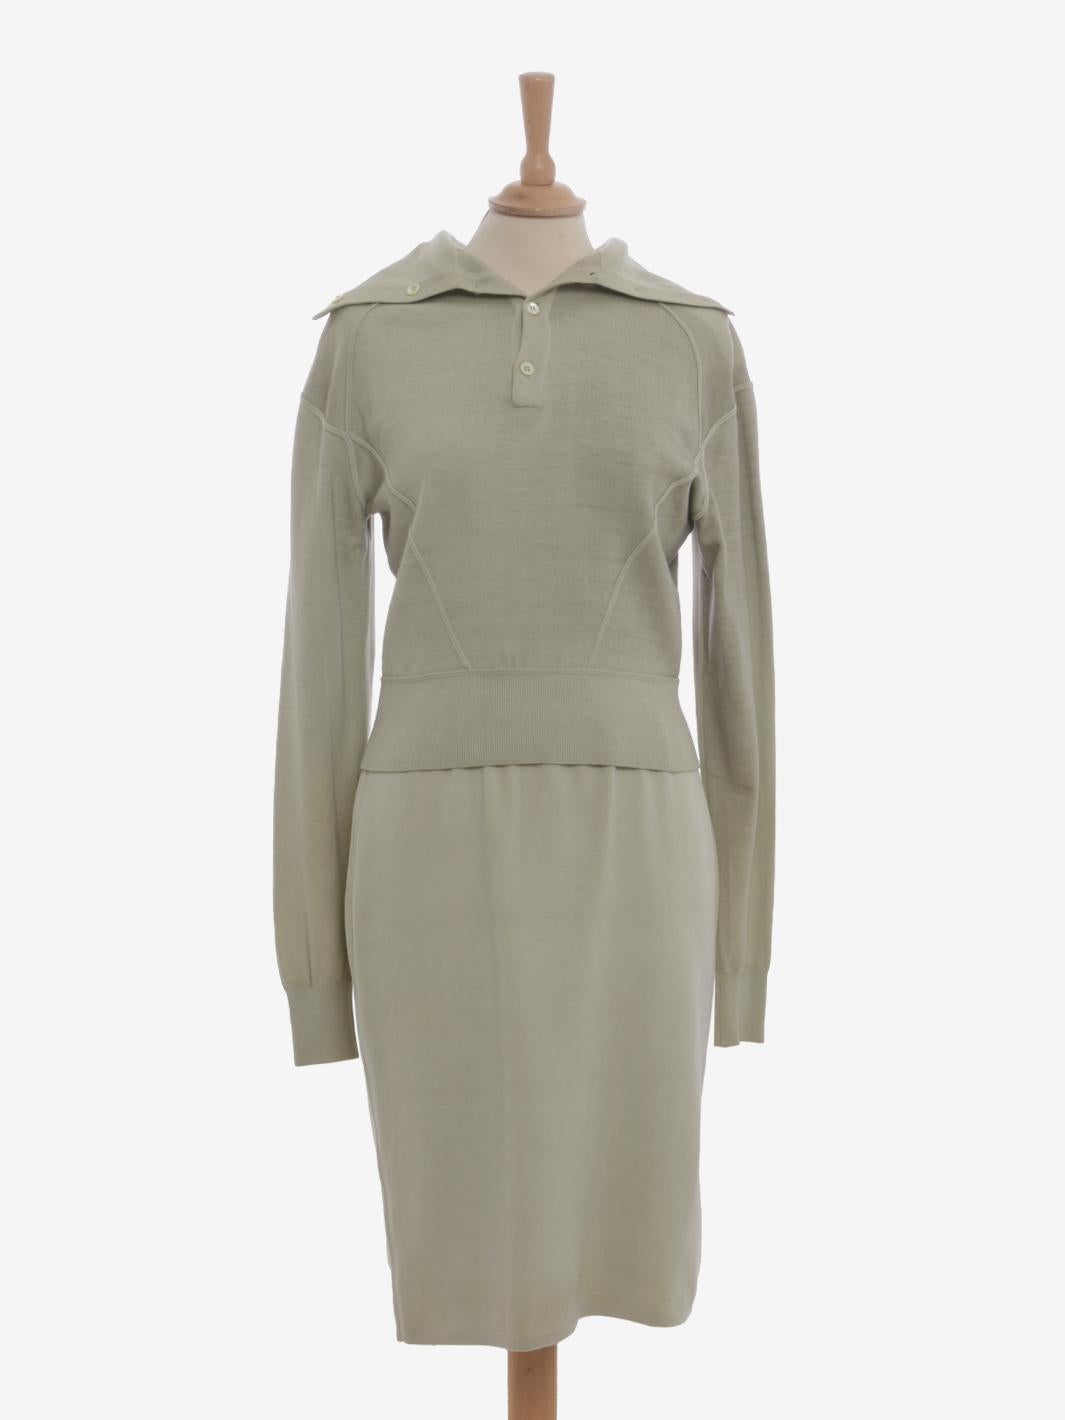 Alaïa Wool Sage Suit is a rare suit made by Azzedine Alaïa in the second half of 1980s characterized by the iconic raised seams that draw the figure with geometric lines, elasticated cuffs and on the waistband of the skirt Made of fine virgin